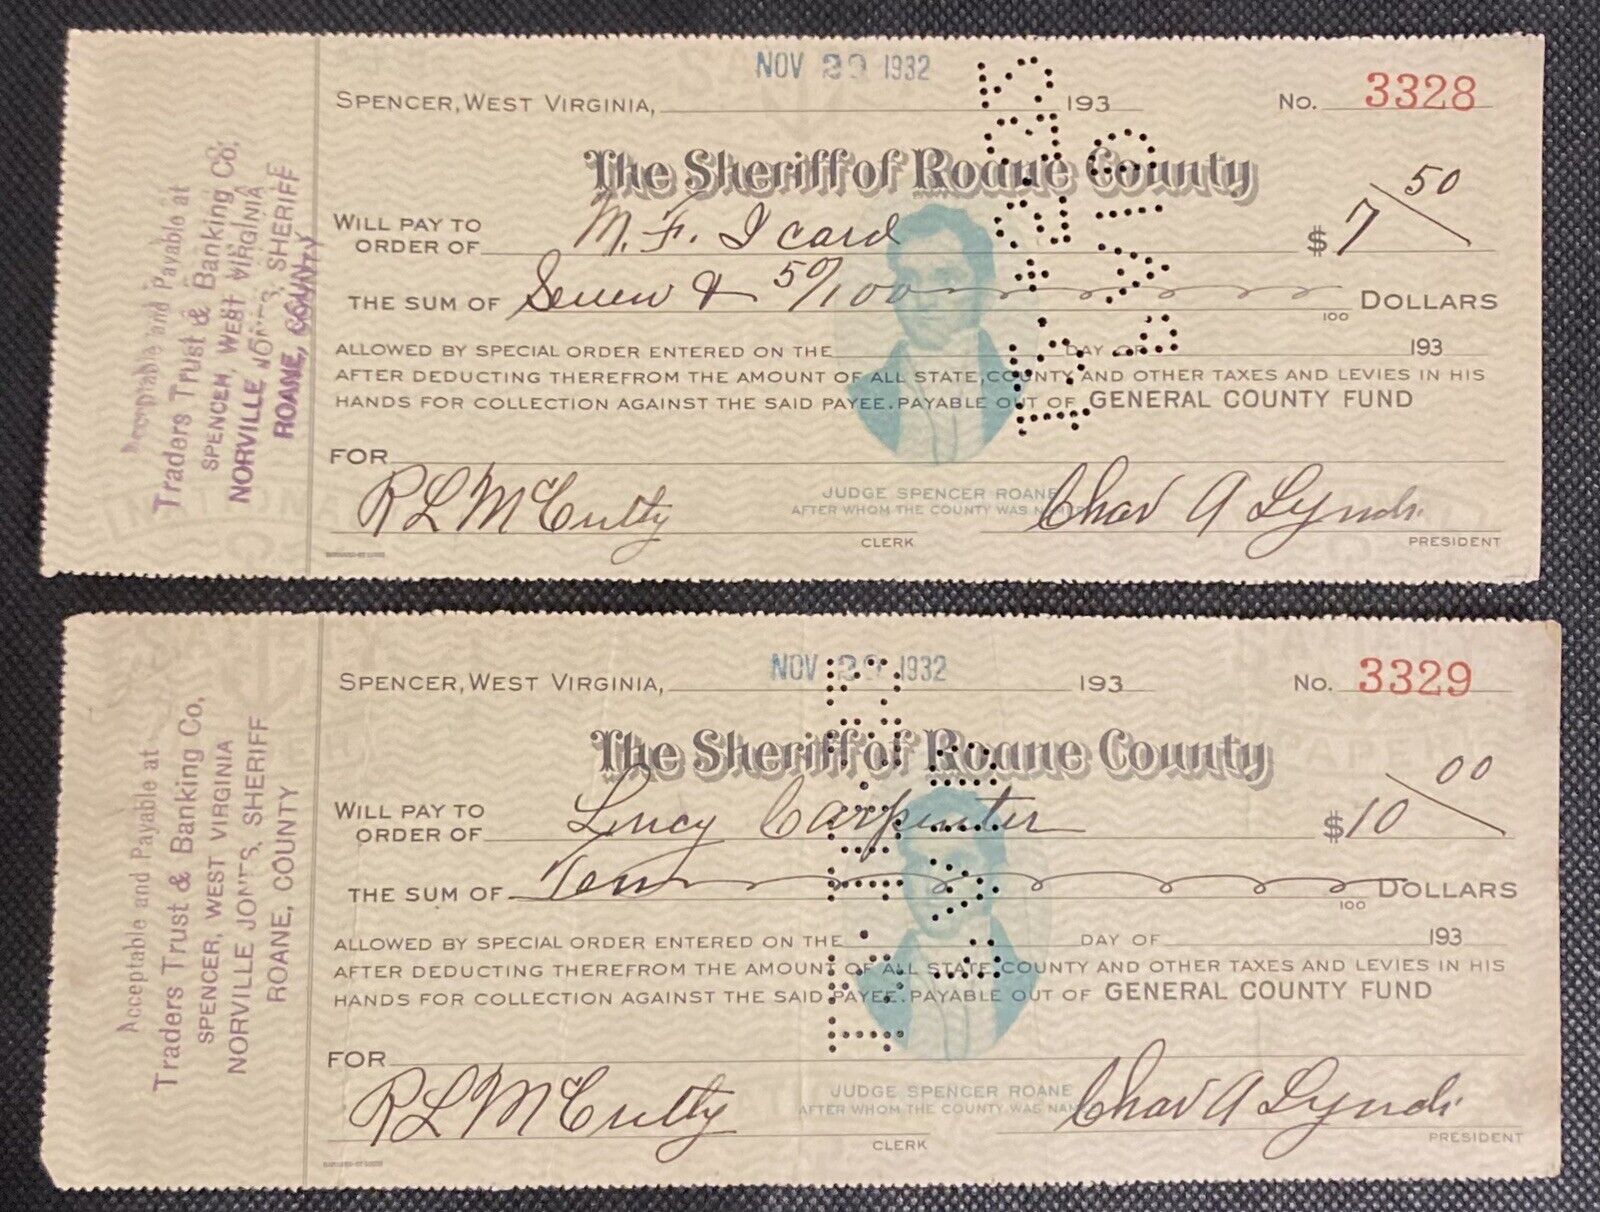 The Sheriff of Roane County Checks - Lot 2 Cashed Cancelled 1932 Spencer, WV